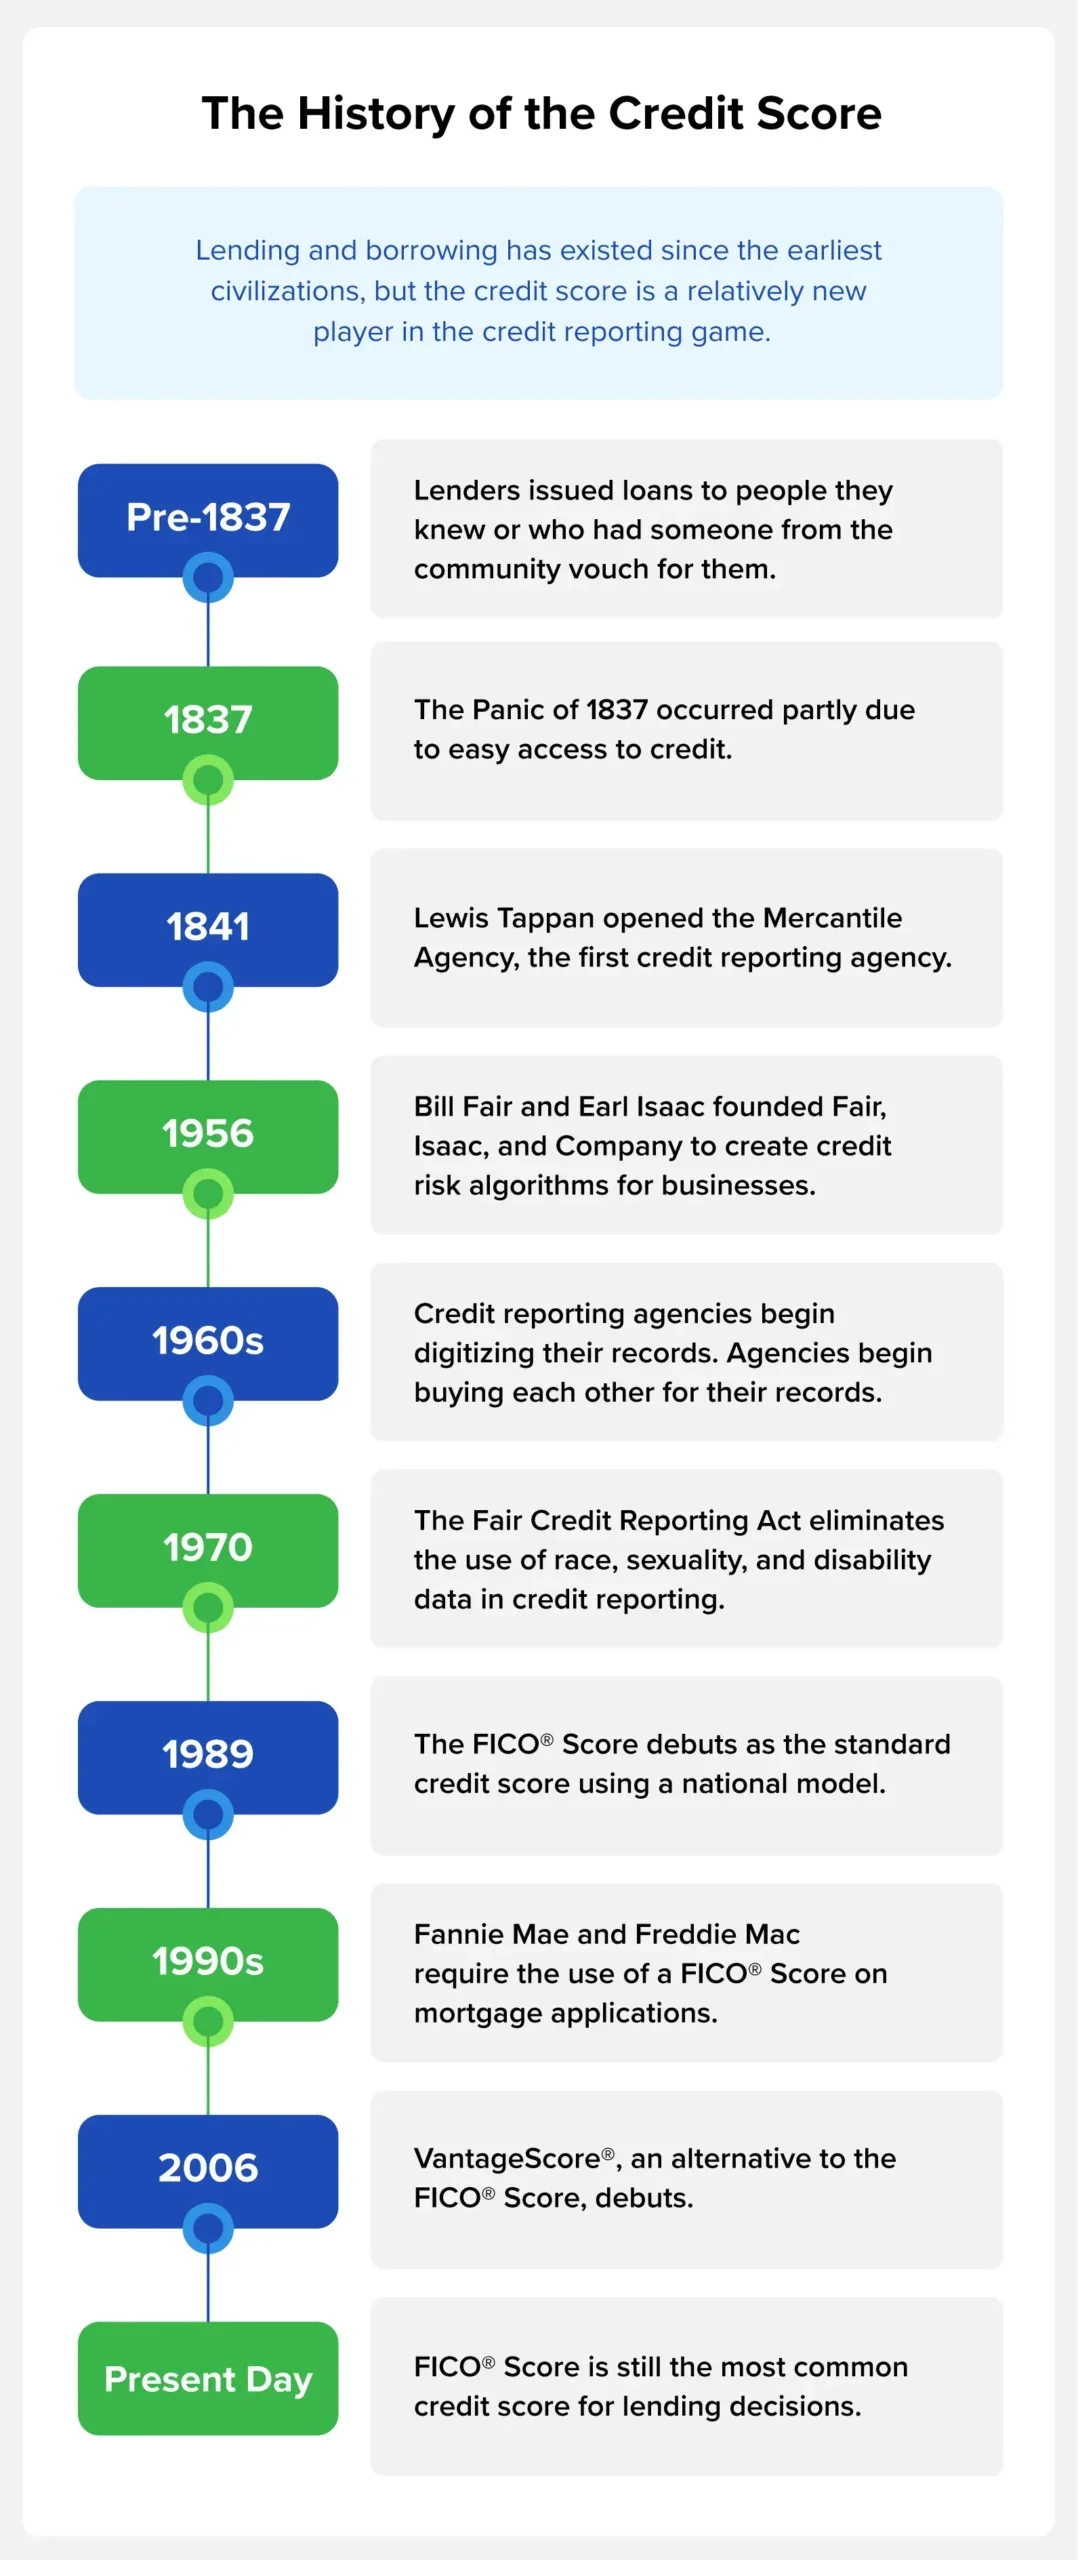 Access to credit score history